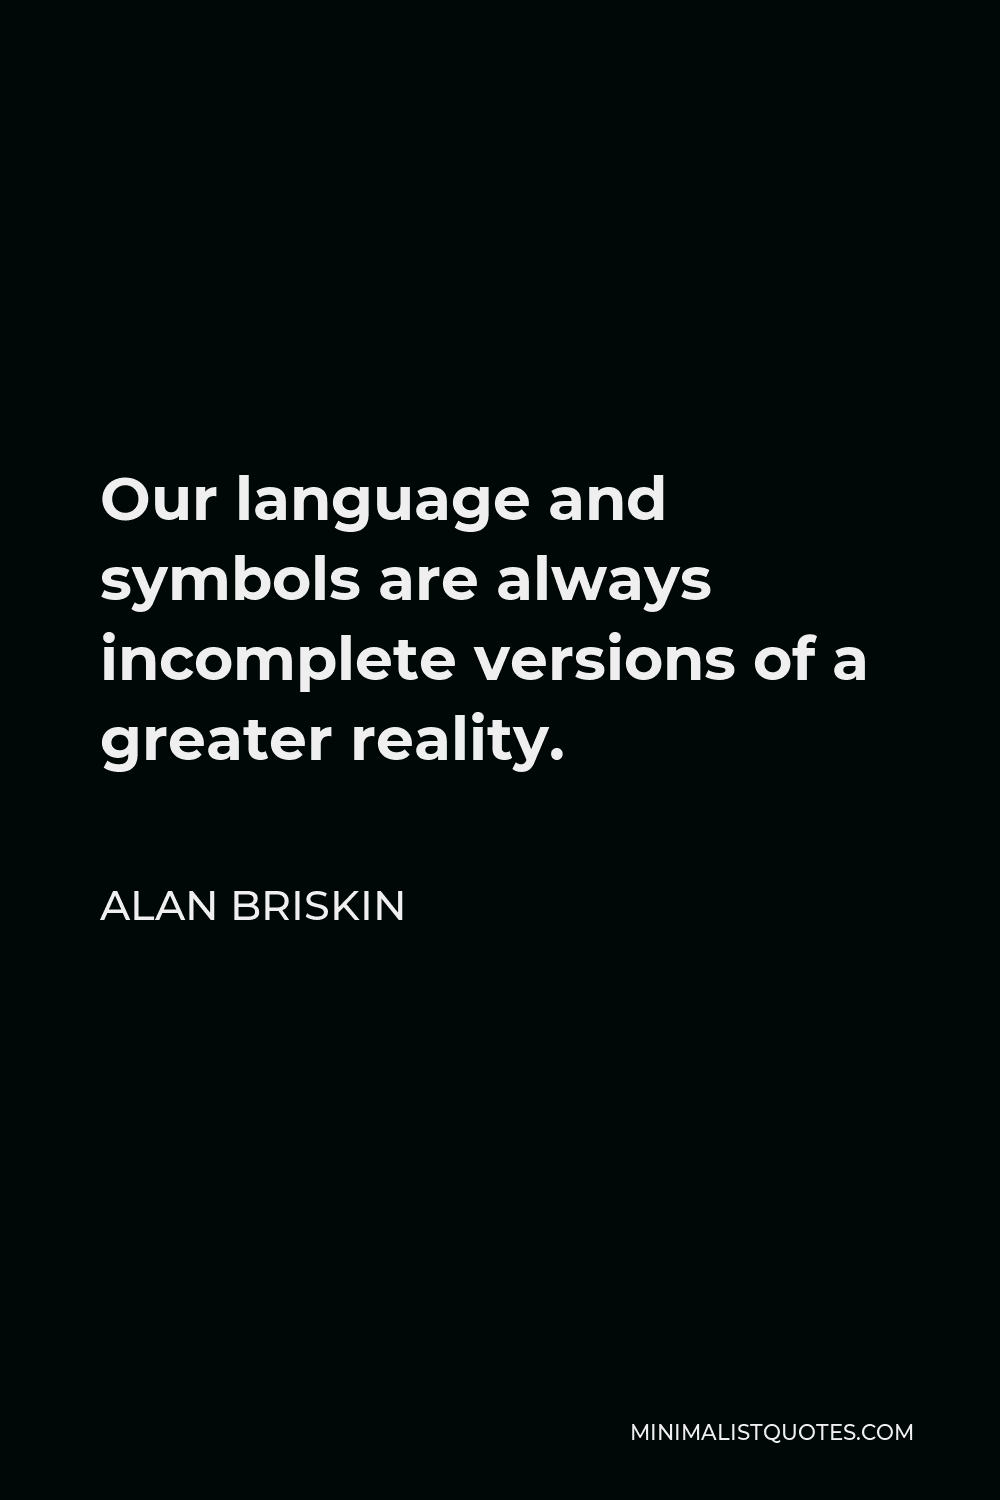 Alan Briskin Quote - Our language and symbols are always incomplete versions of a greater reality.